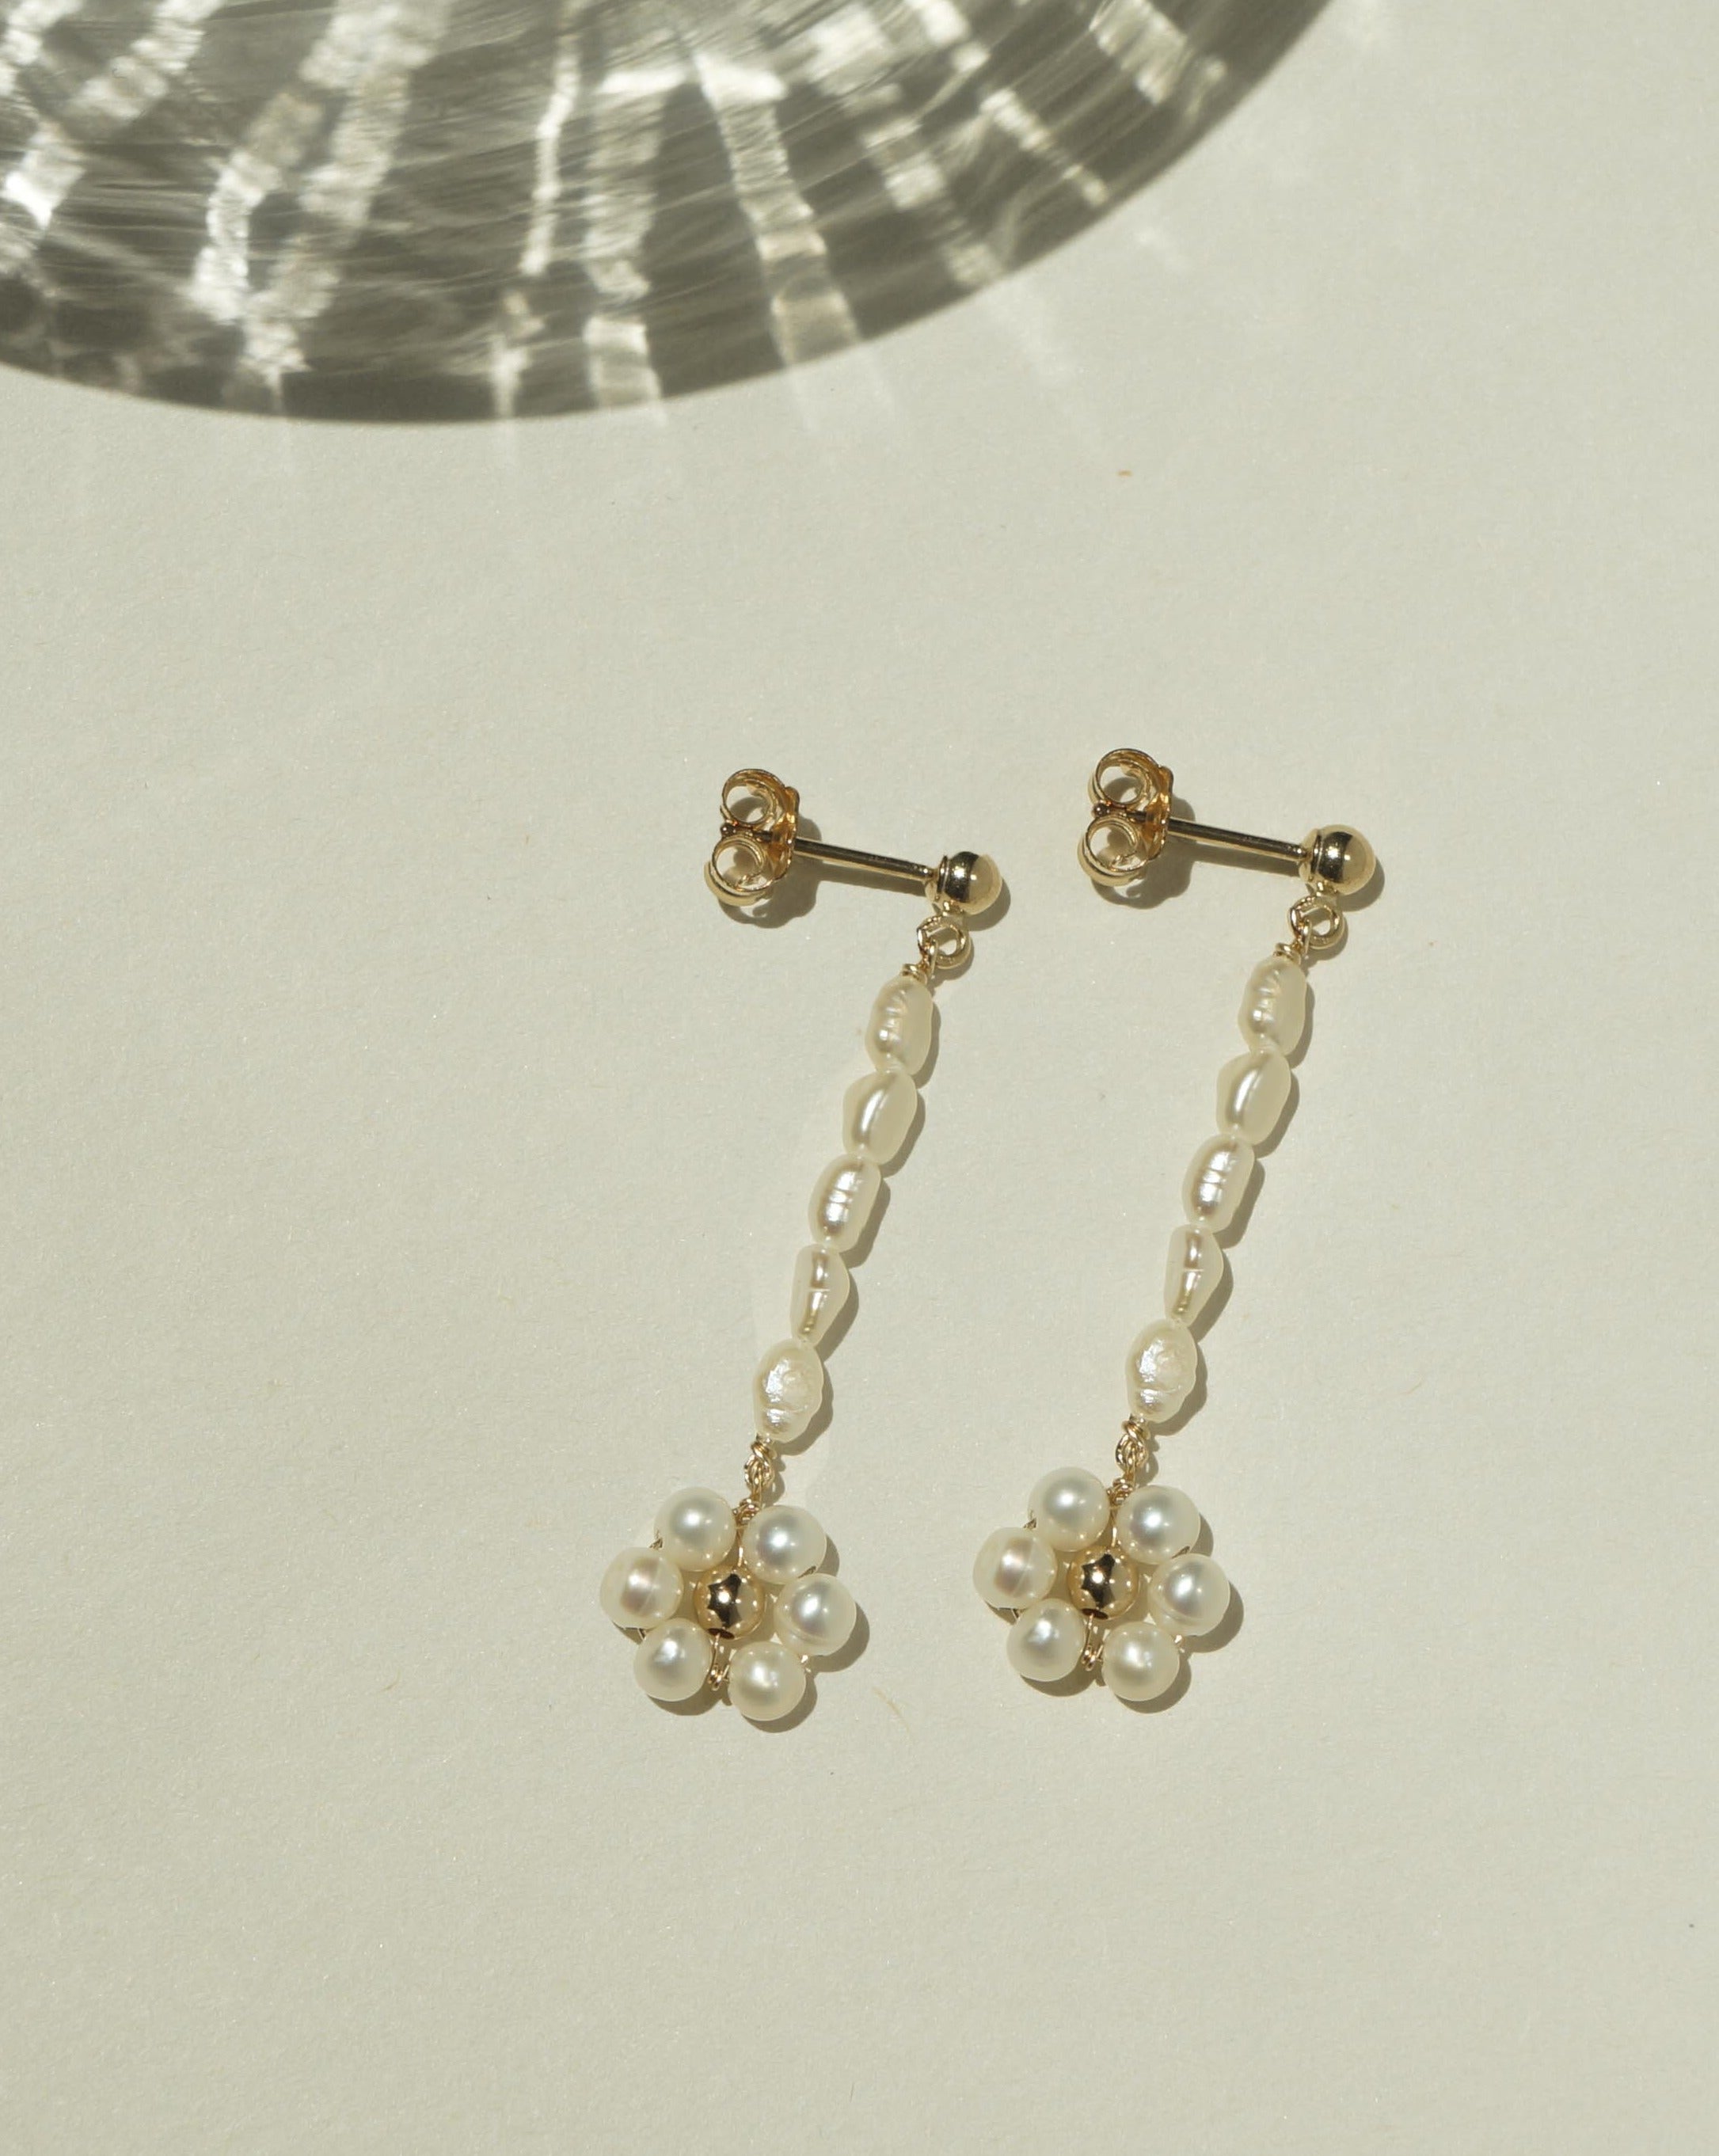 Sunflower Earrings by KOZAKH. 3mm Ball stud drop earrings with 2 inches drop length, crafted in 14K Gold Filled, featuring 3mm rice freshwater Pearls and 3-4mm round freshwater Pearls forming a flower charm.